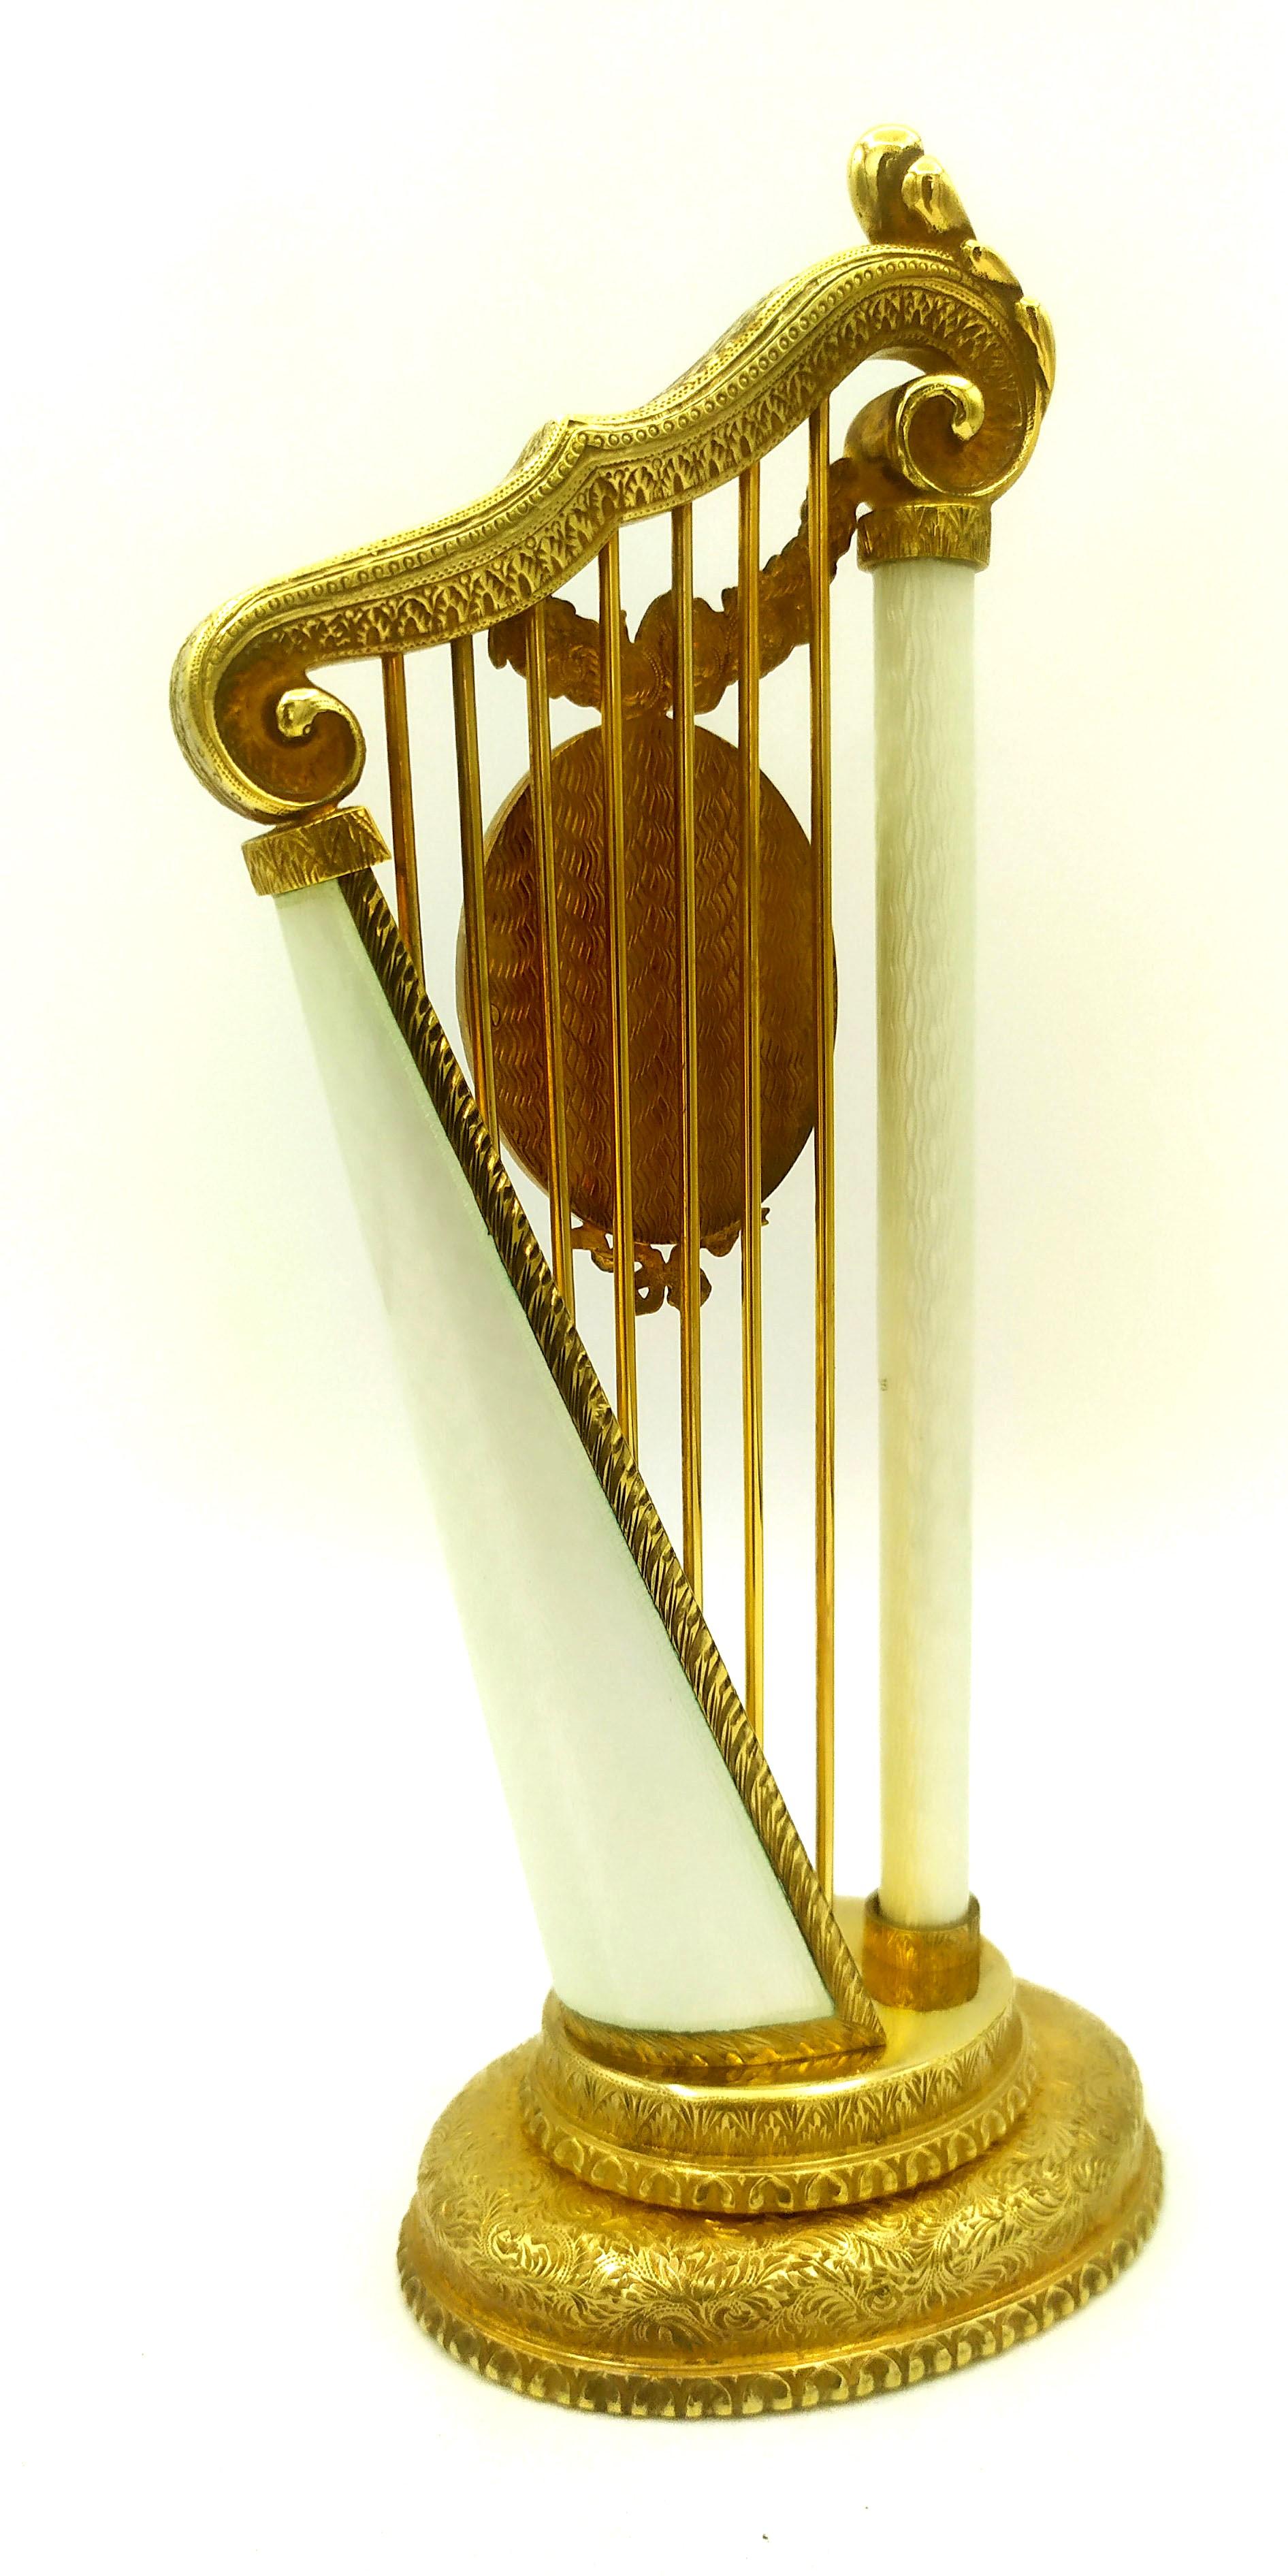 Oval photo frame inserted into a harp-shaped object, in 925/1000 sterling silver gold plated with translucent fired enamels on guilloché inspired by a model created by Peter Carl Fabergè in late Russian Empire style. Dimensions: oval base cm. 6.2 x